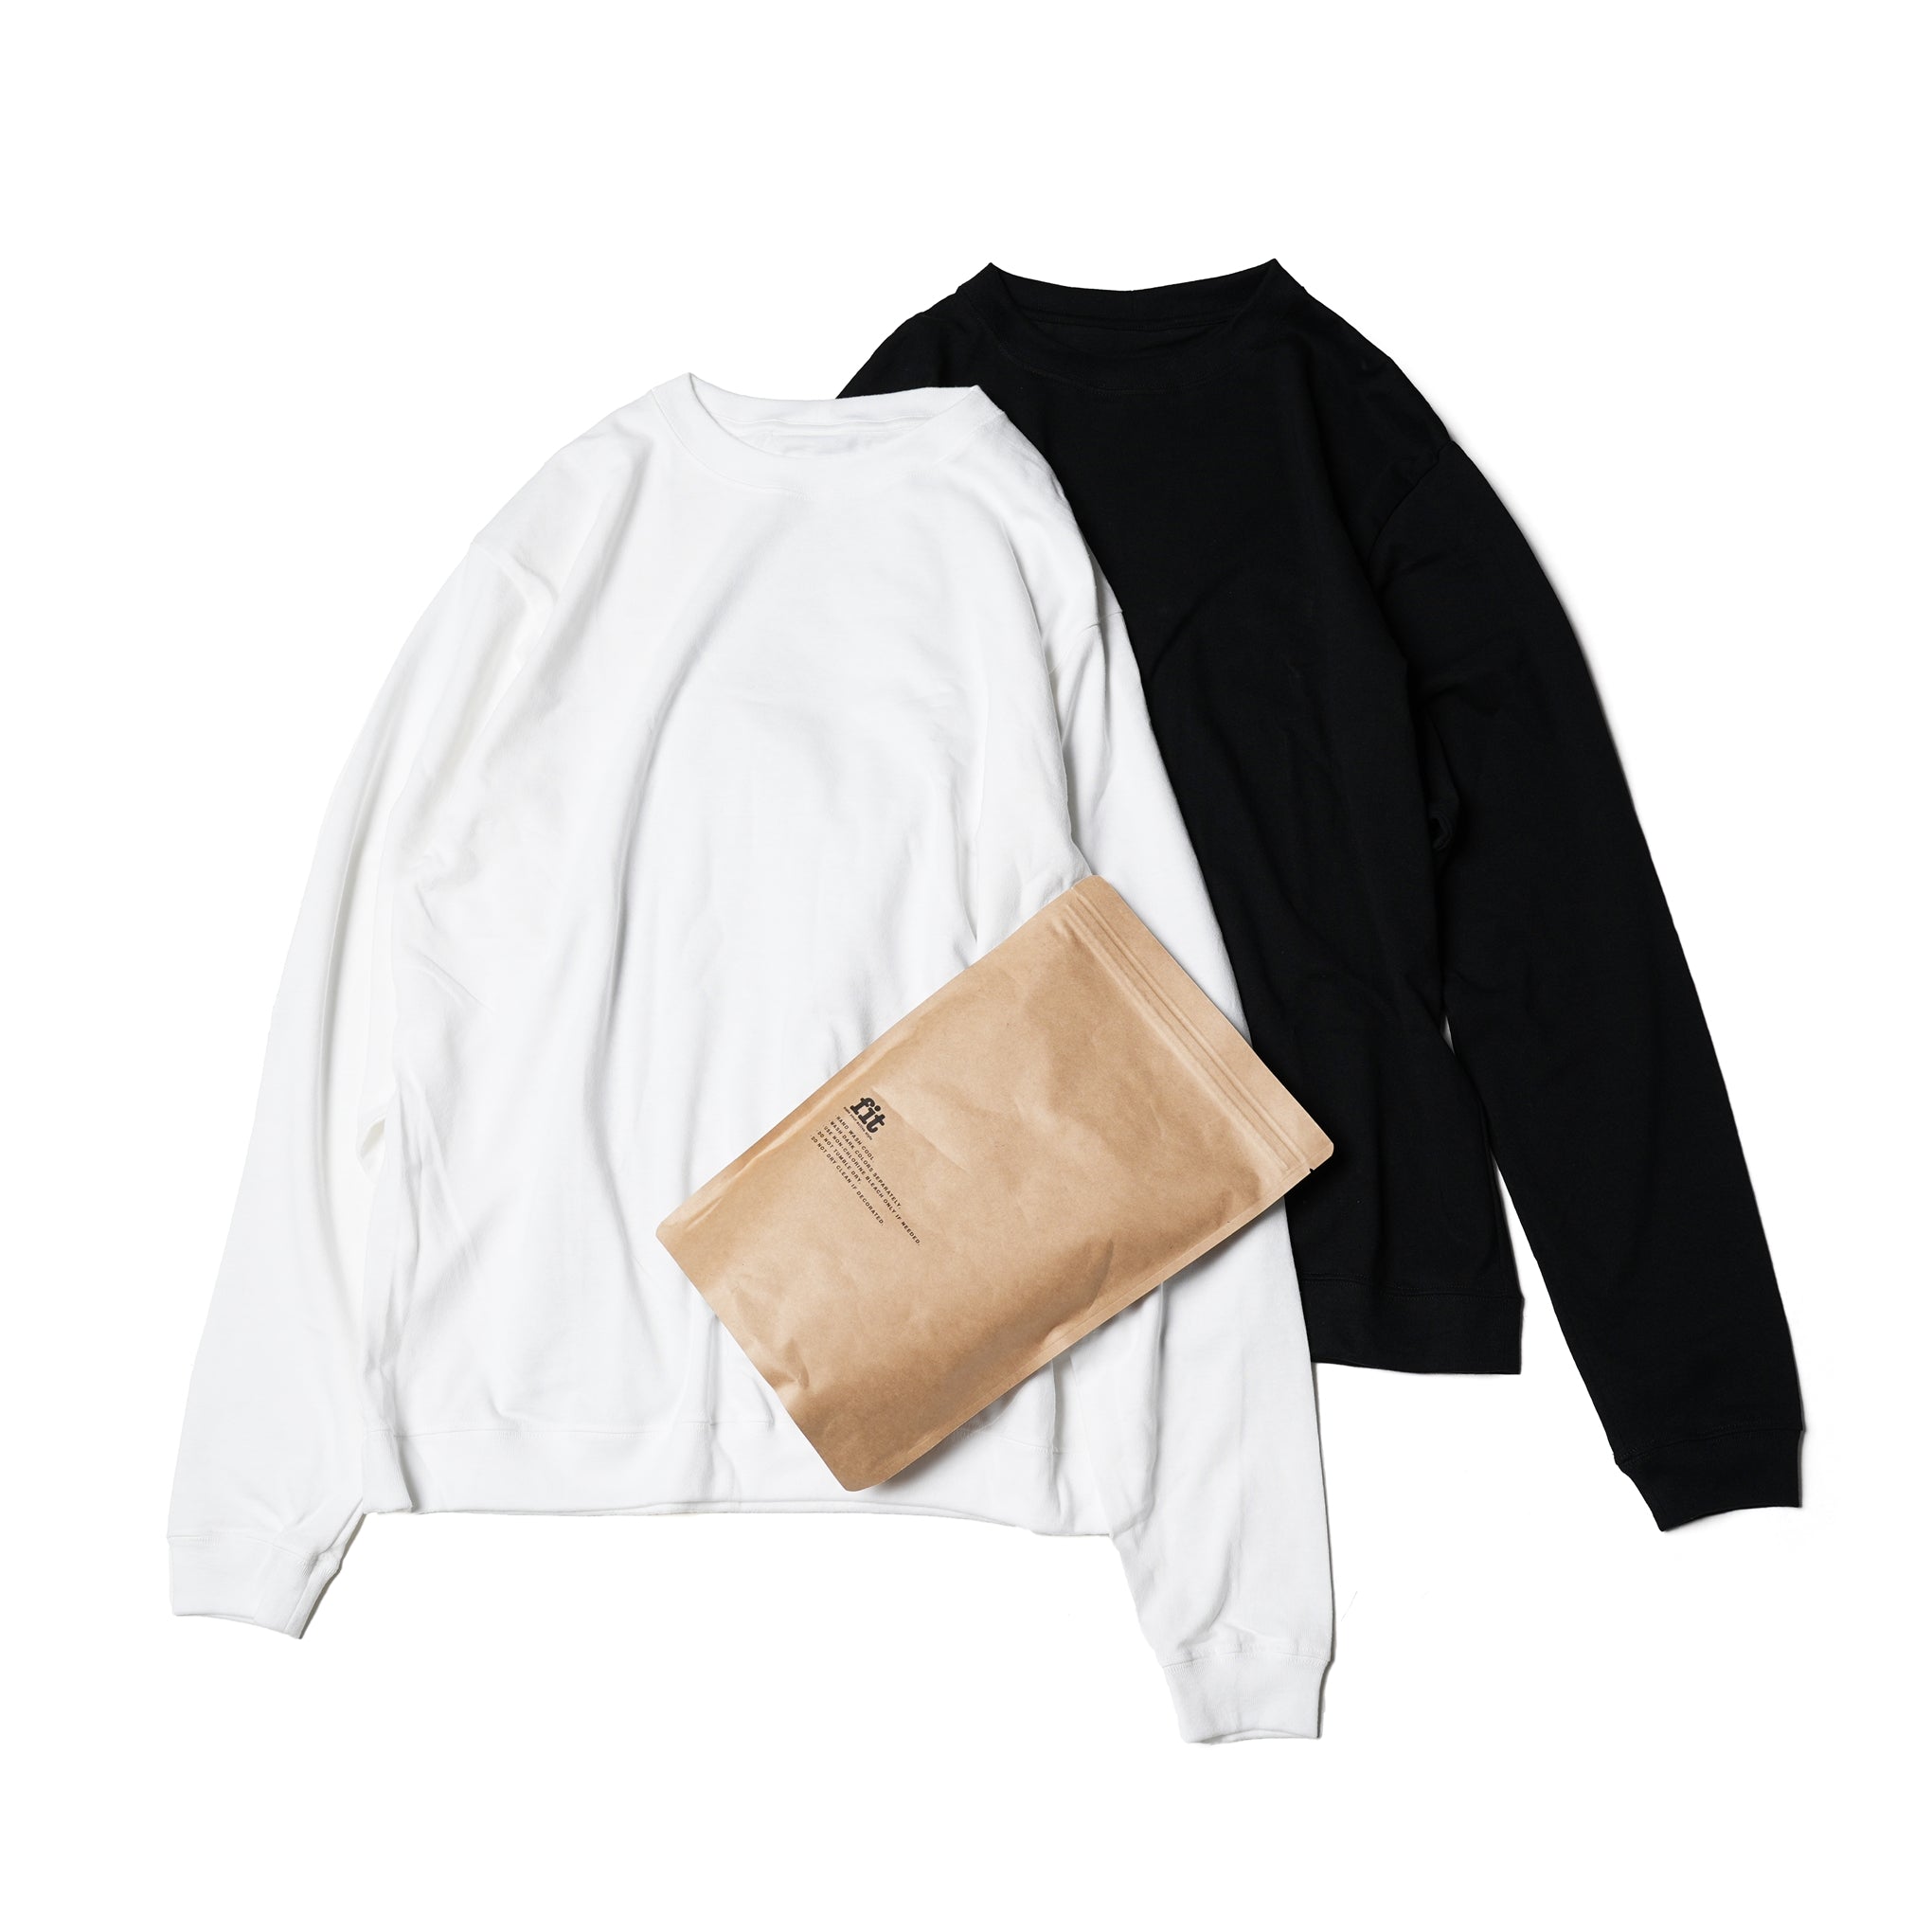 No:FIT-02 | Name:WIDE CREW NECK L/S T-SHIRTS | Color:White/Black【FIT_フィット】